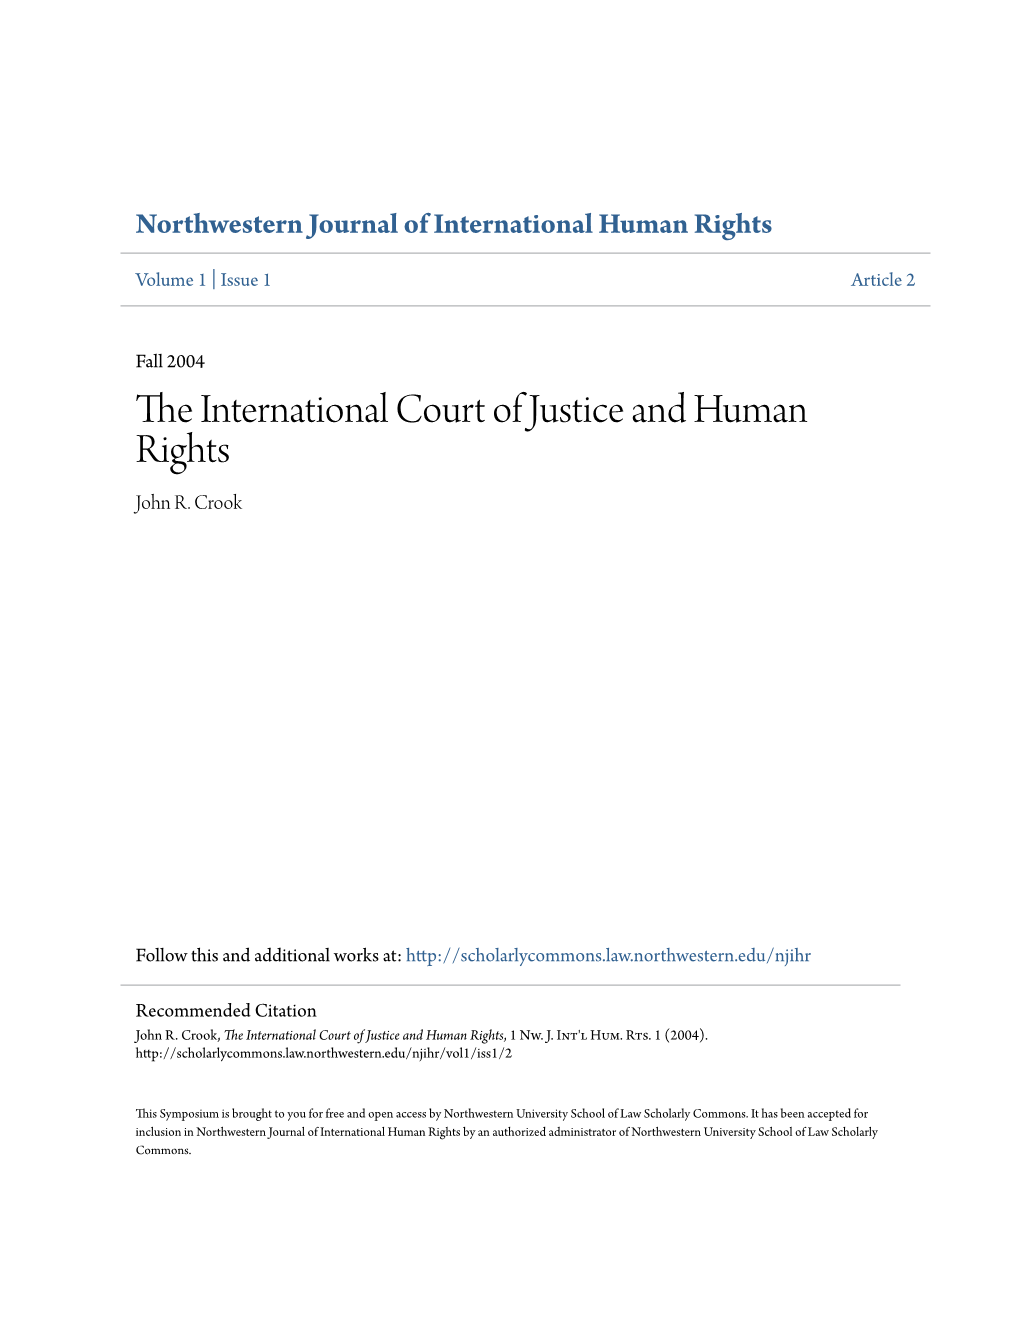 The International Court of Justice and Human Rights, 1 Nw